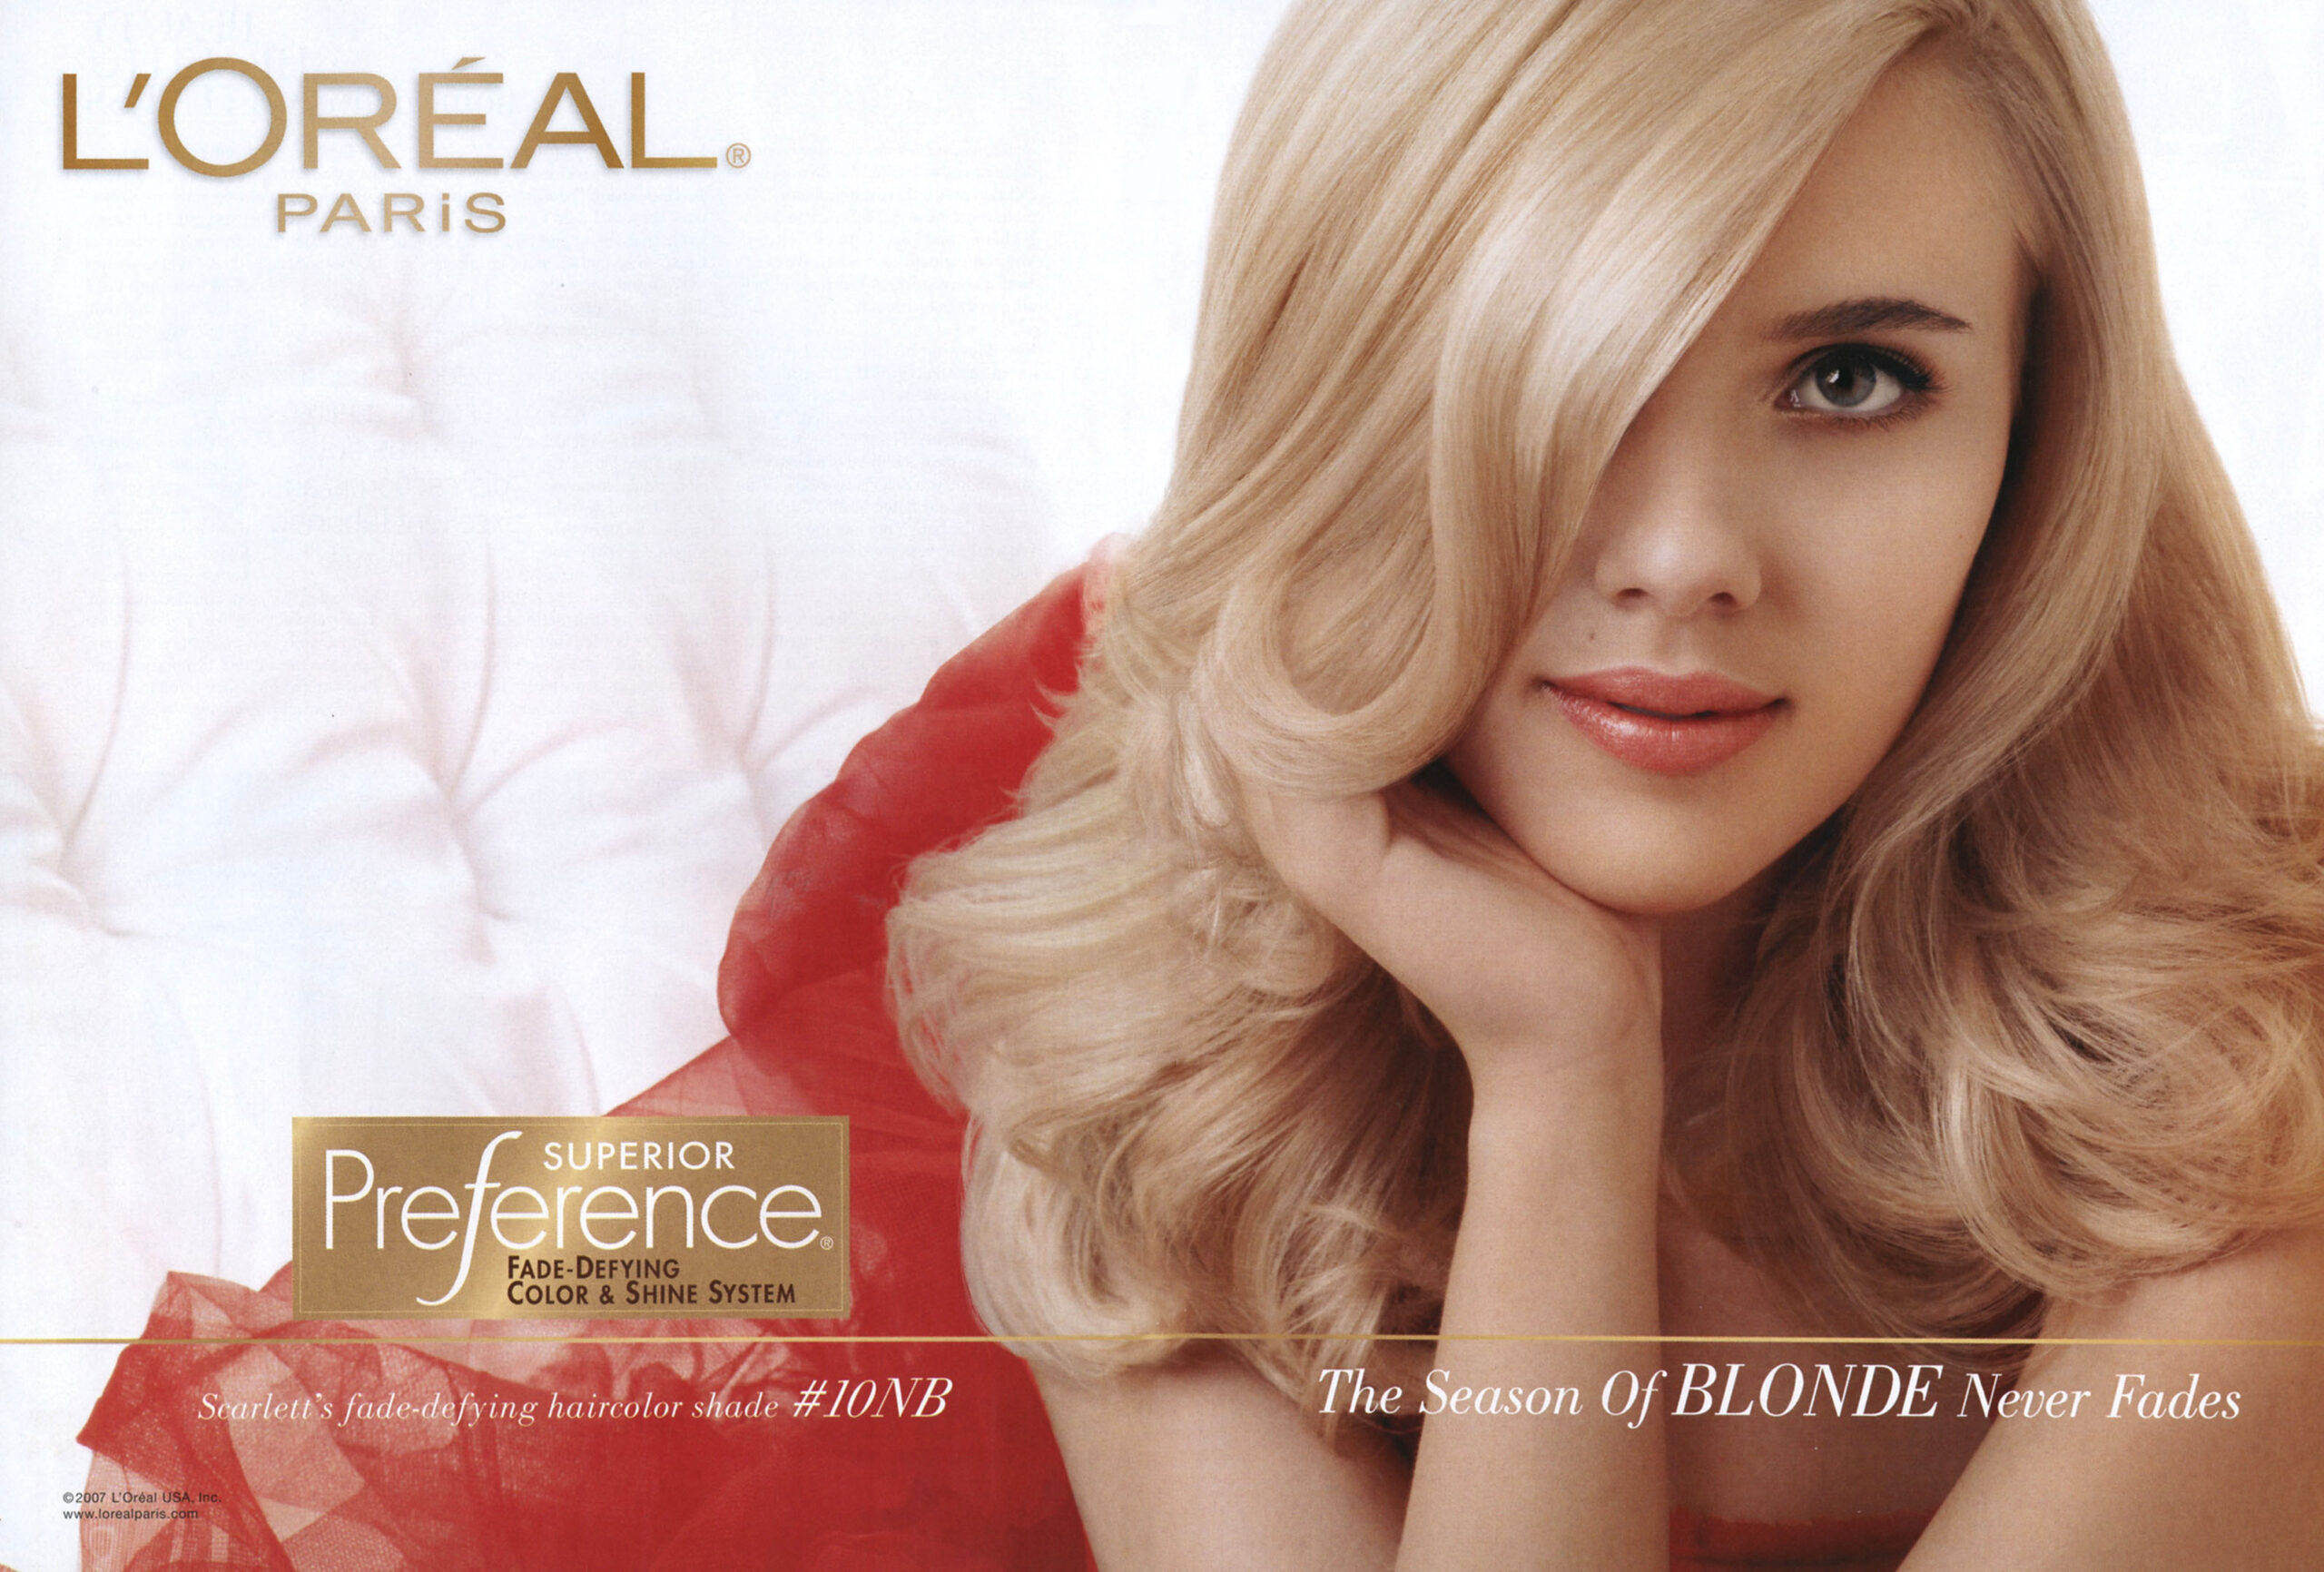 Scarlett Johansson won a £2.2million deal to advertise L’Oreal make-up in 2006